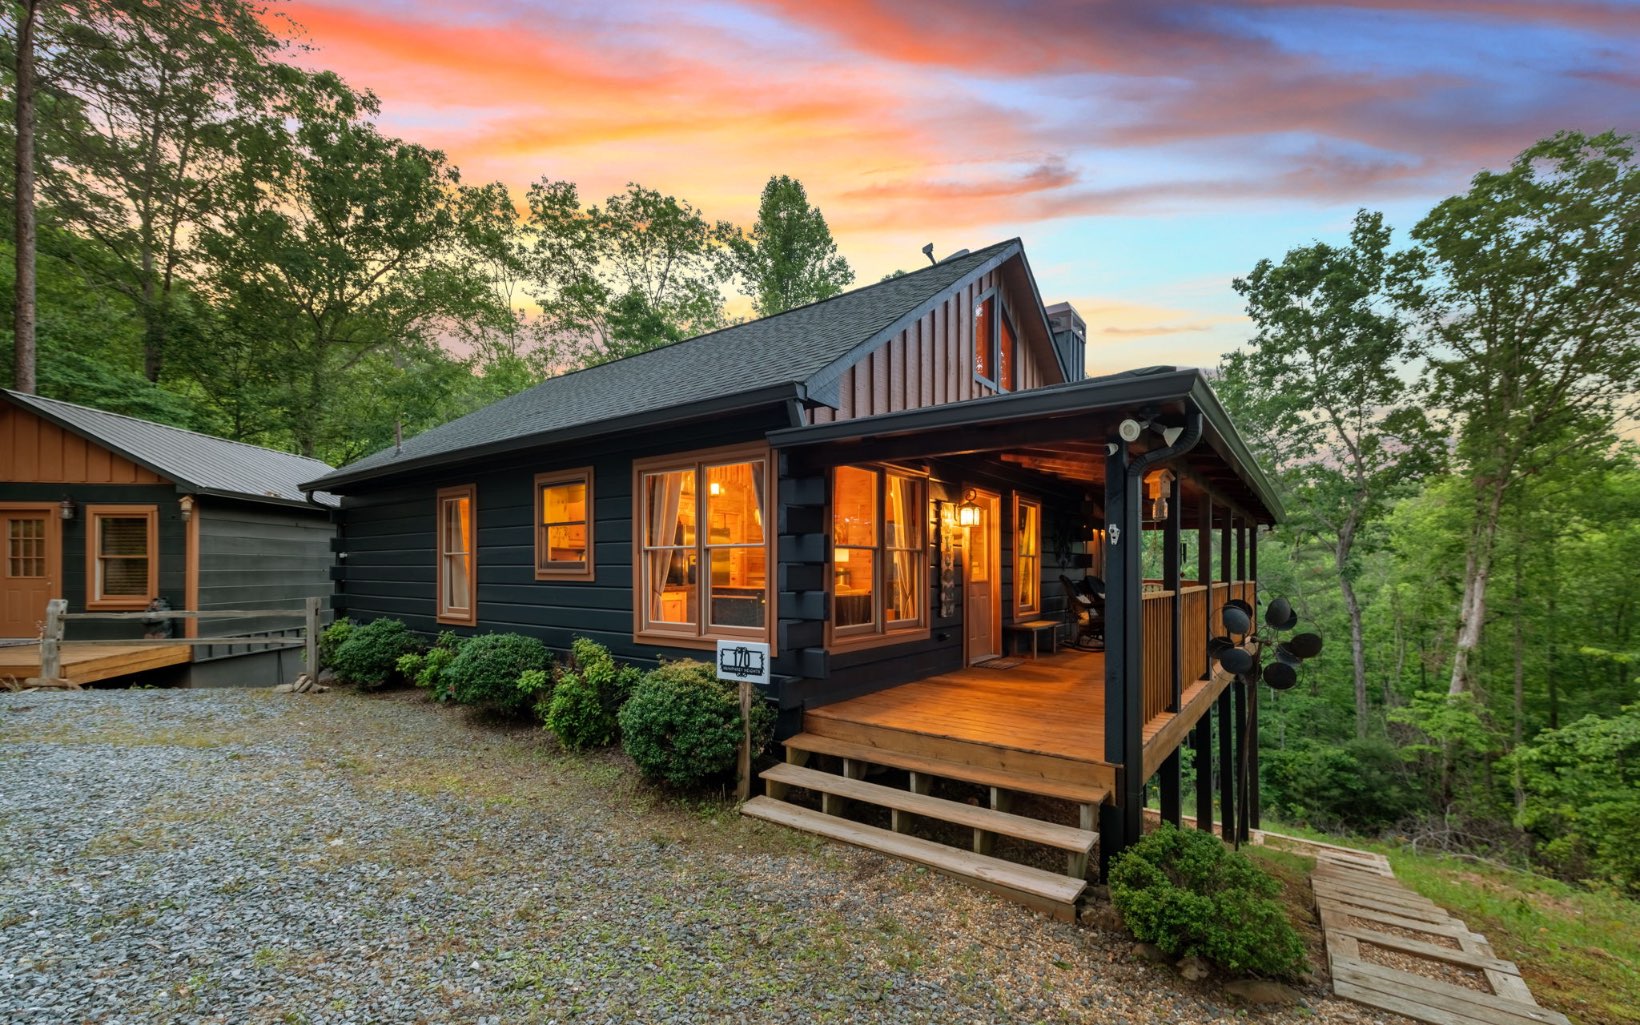 Tucked away in the heart of the Blue Ridge Mountains and exuding charm and rustic flair, welcome to "Knotty by Nature!" Classic log home w/ reimagined contemporary elements is complete with three full bedrooms, two full baths, an additional sleeping loft making for a total of four bedroom area, large living room w/ stone F/P, wraparound deck, and full terrace level den area w/ bar and game room! Outside on the terrace level, find a large covered jacuzzi deck and gorgeous backyard. In addition, cabin has a detached studio w/ electric that could make for a perfect artist studio, guest house, or bunk room -- all you need is the vision! Complete with a one car garage underneath the studio, sold FULLY FURNISHED, and with an additional lot sold WITH THE CABIN that also has community water and utilities -- this cabin won't last long! Call today.